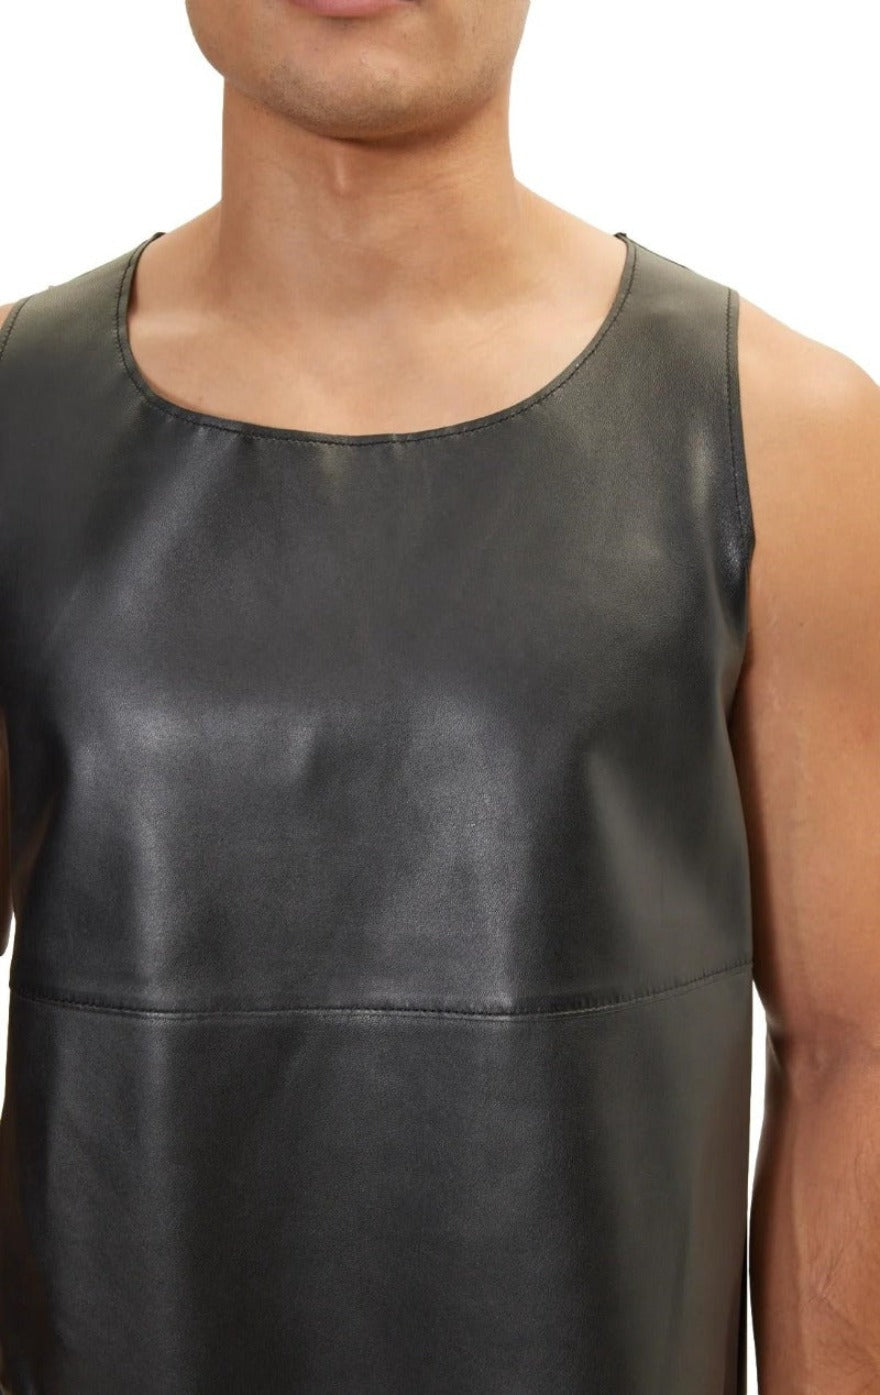 Picture of a model wearing our  Mens Black Leather Tank Top, close up view.